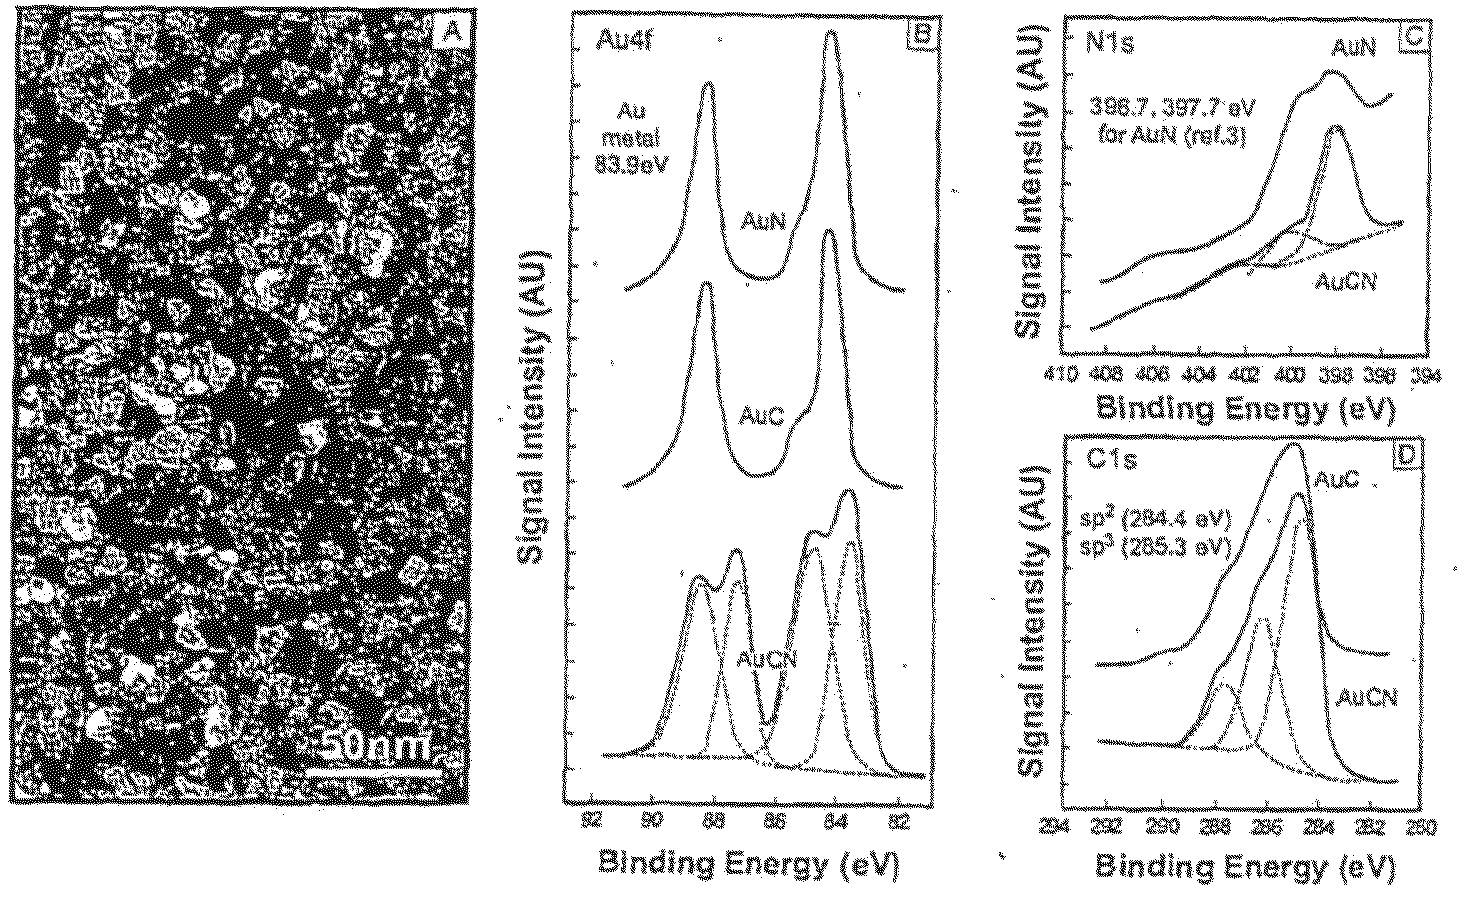 Metal binary and ternary compounds produced by cathodic arc deposition